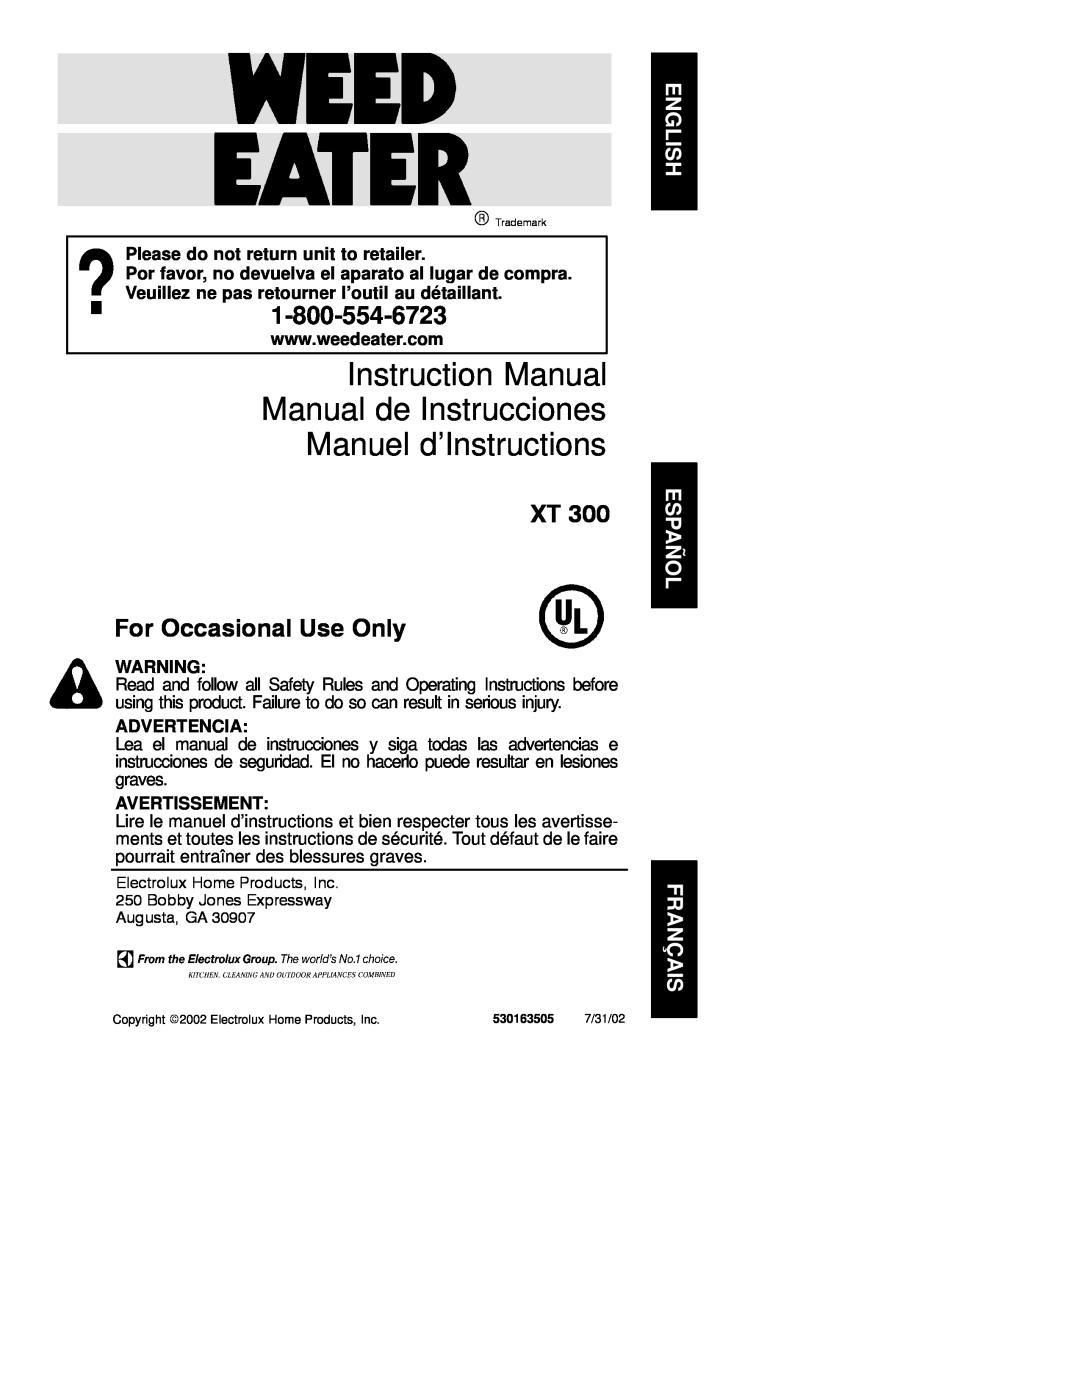 Weed Eater 530163505 instruction manual Please do not return unit to retailer, Advertencia, Avertissement 